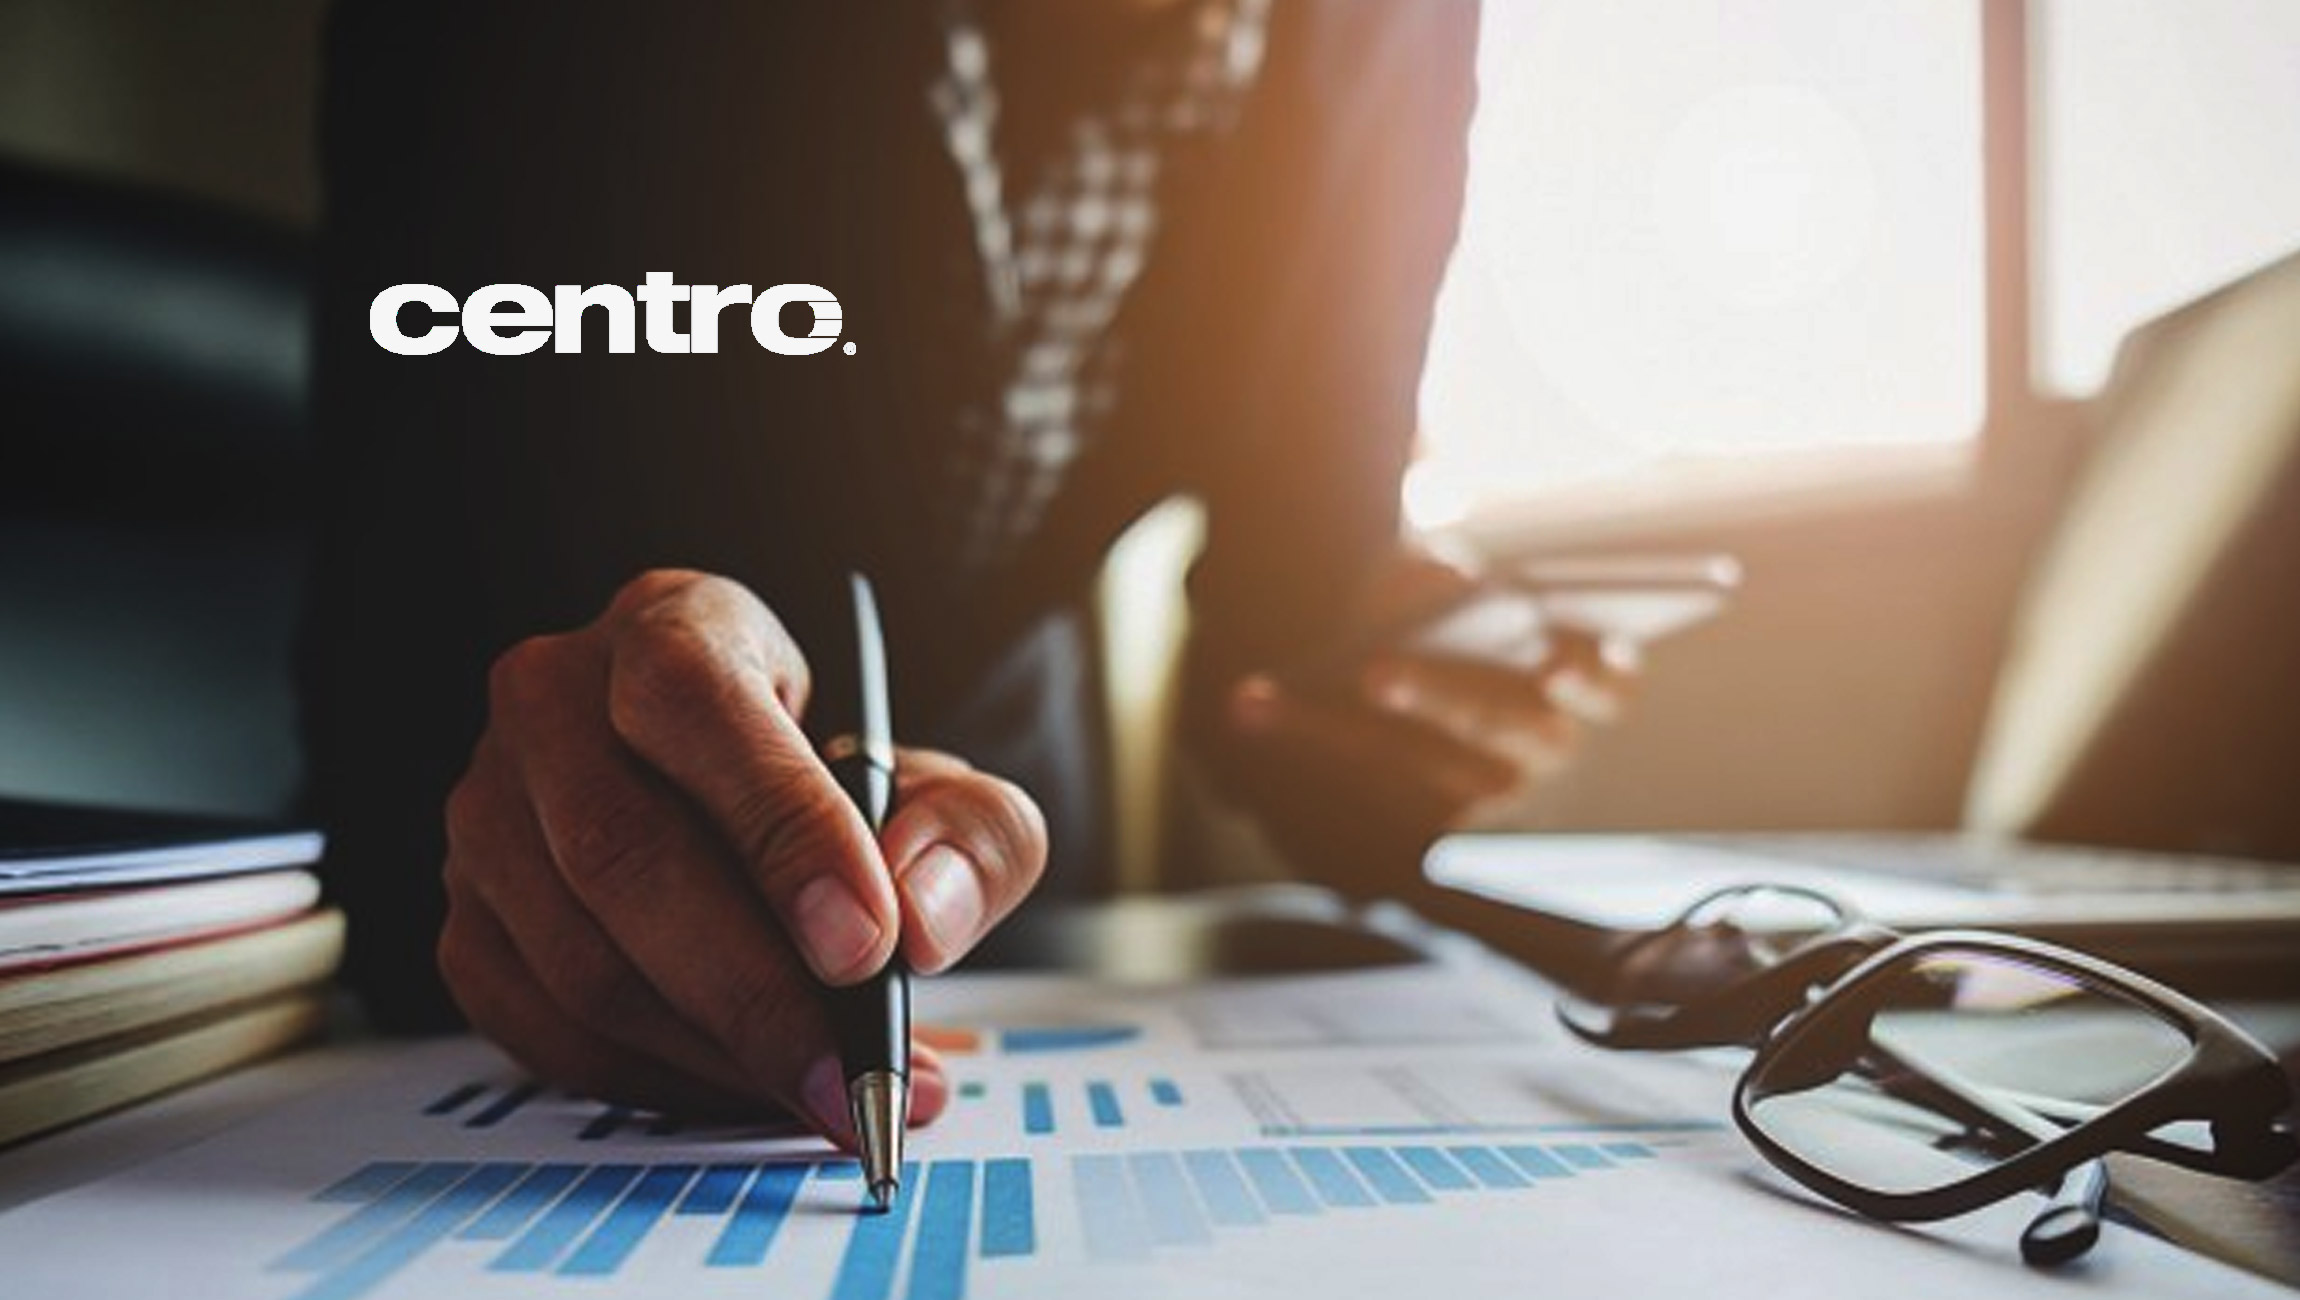 Centro Positioned as a Challenger in the Gartner 2020 Magic Quadrant for Ad Tech